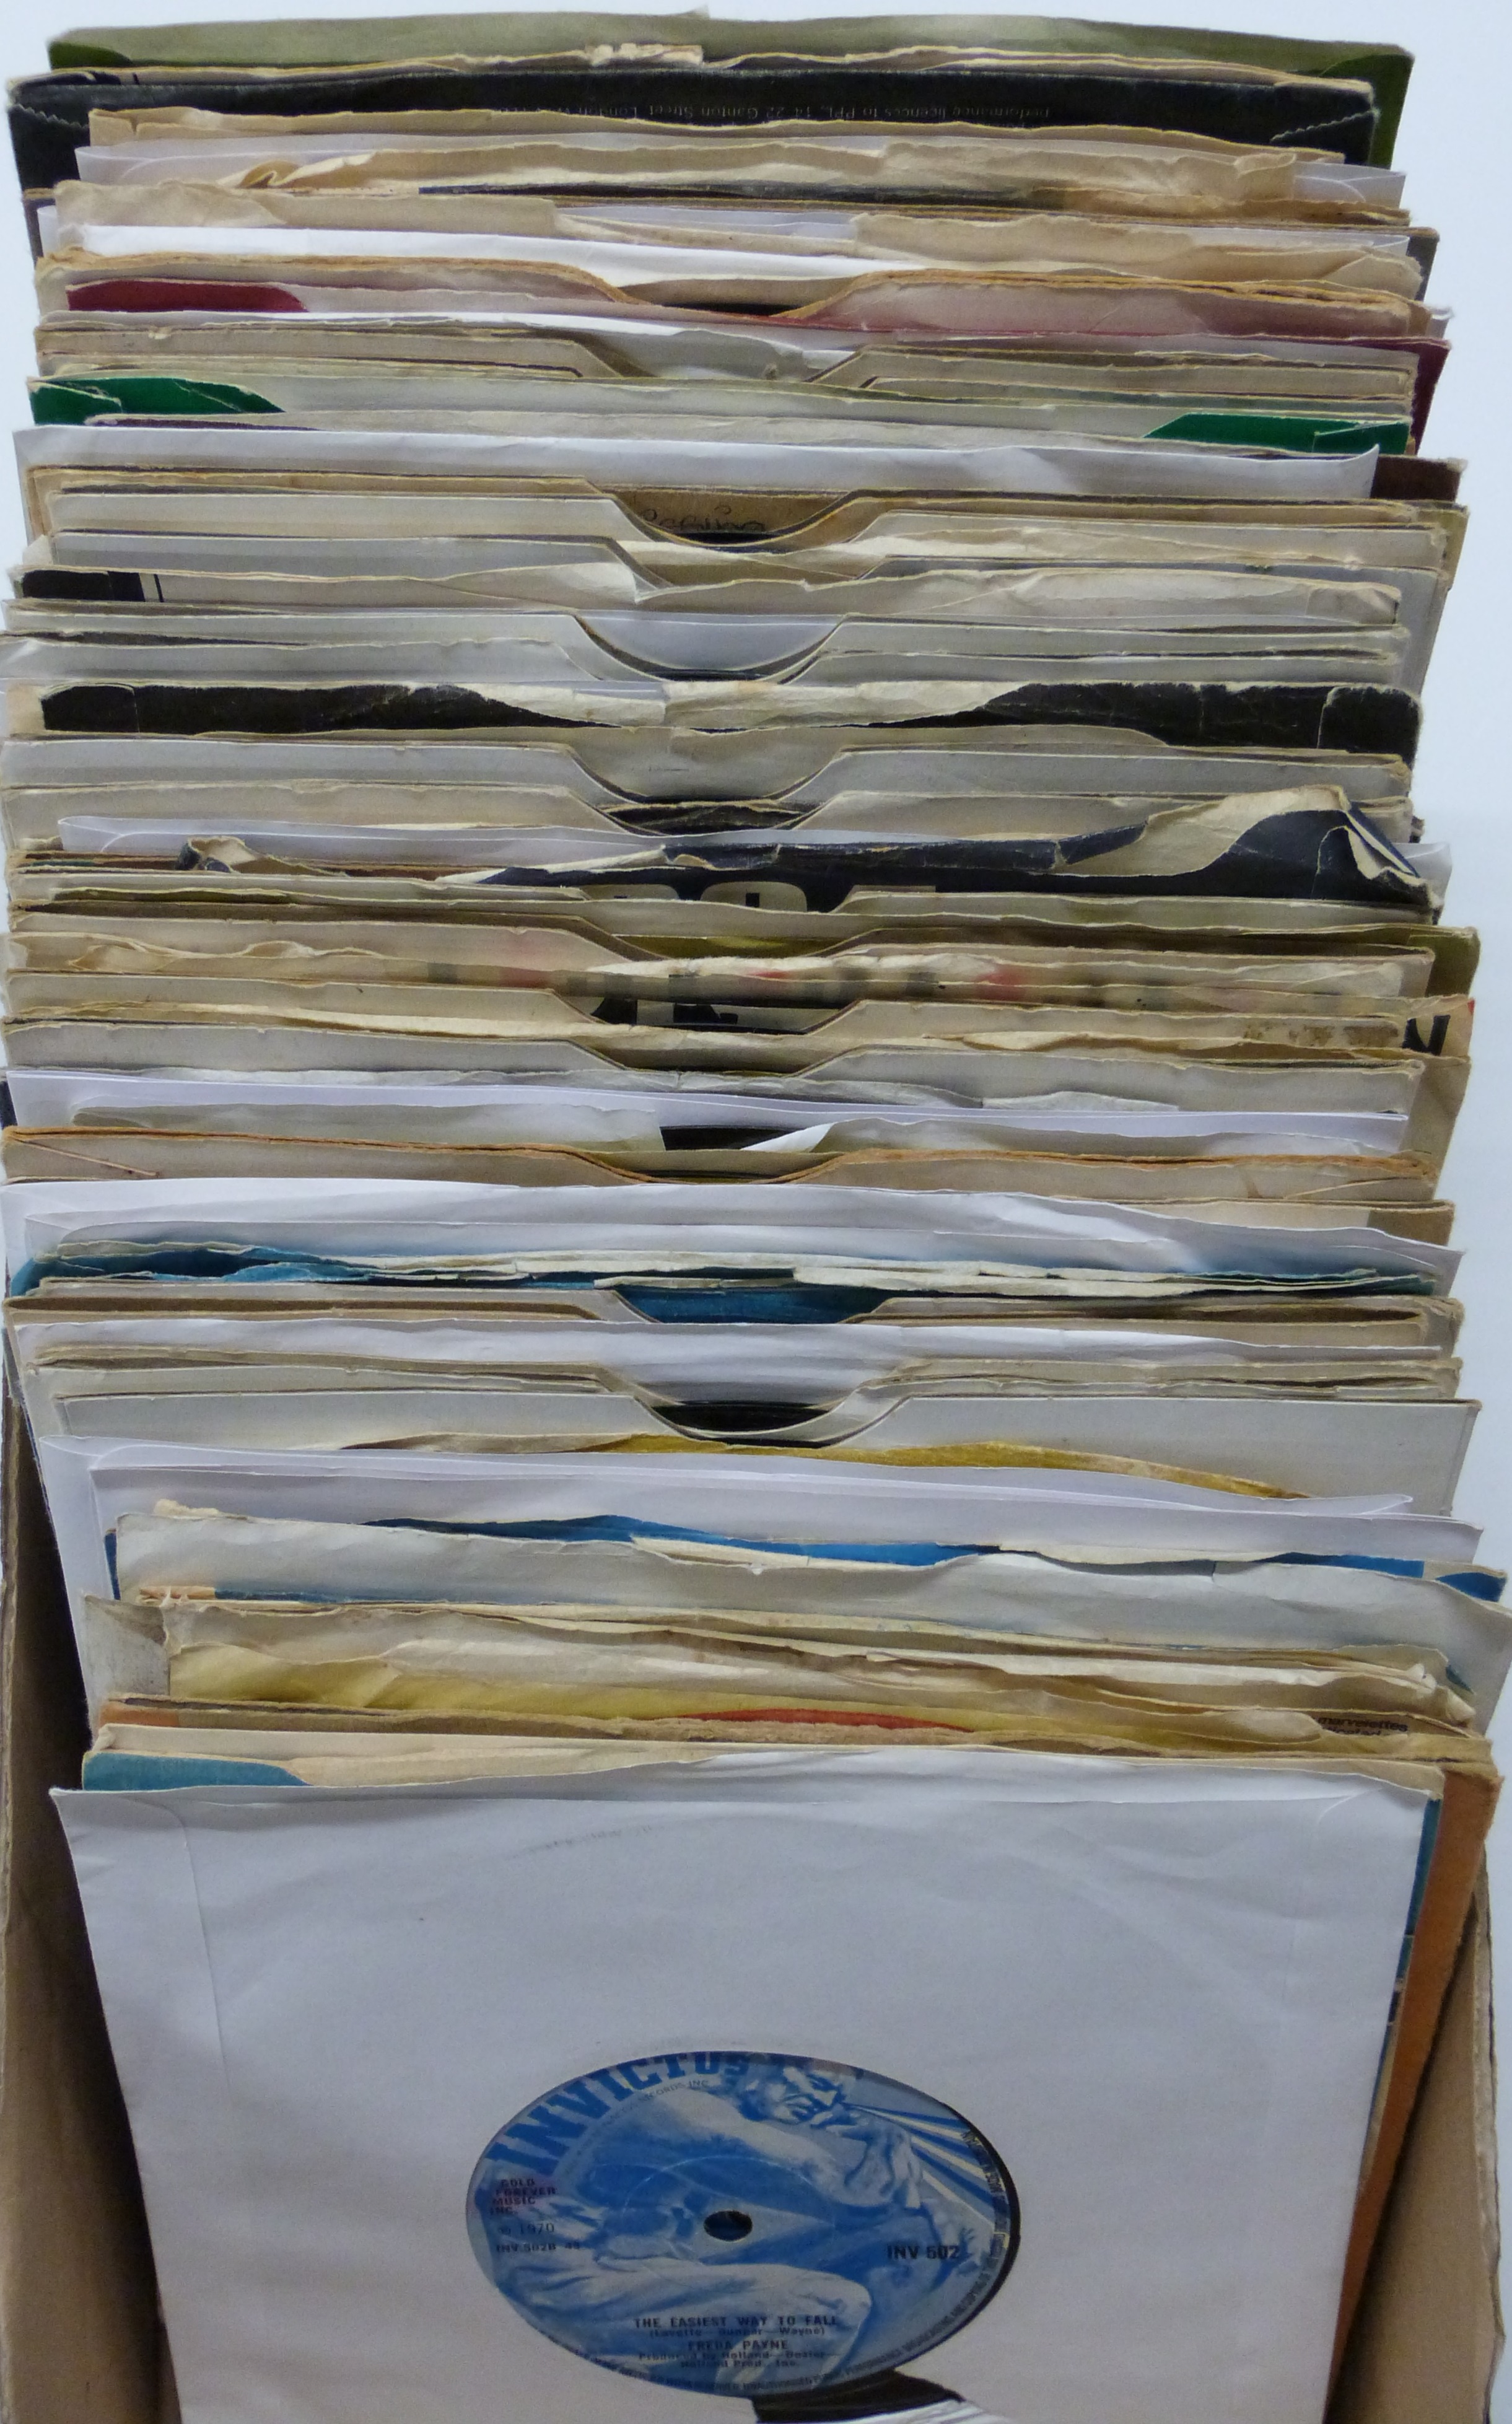 Soul / Disco - Approximately 100 singles - Image 3 of 3